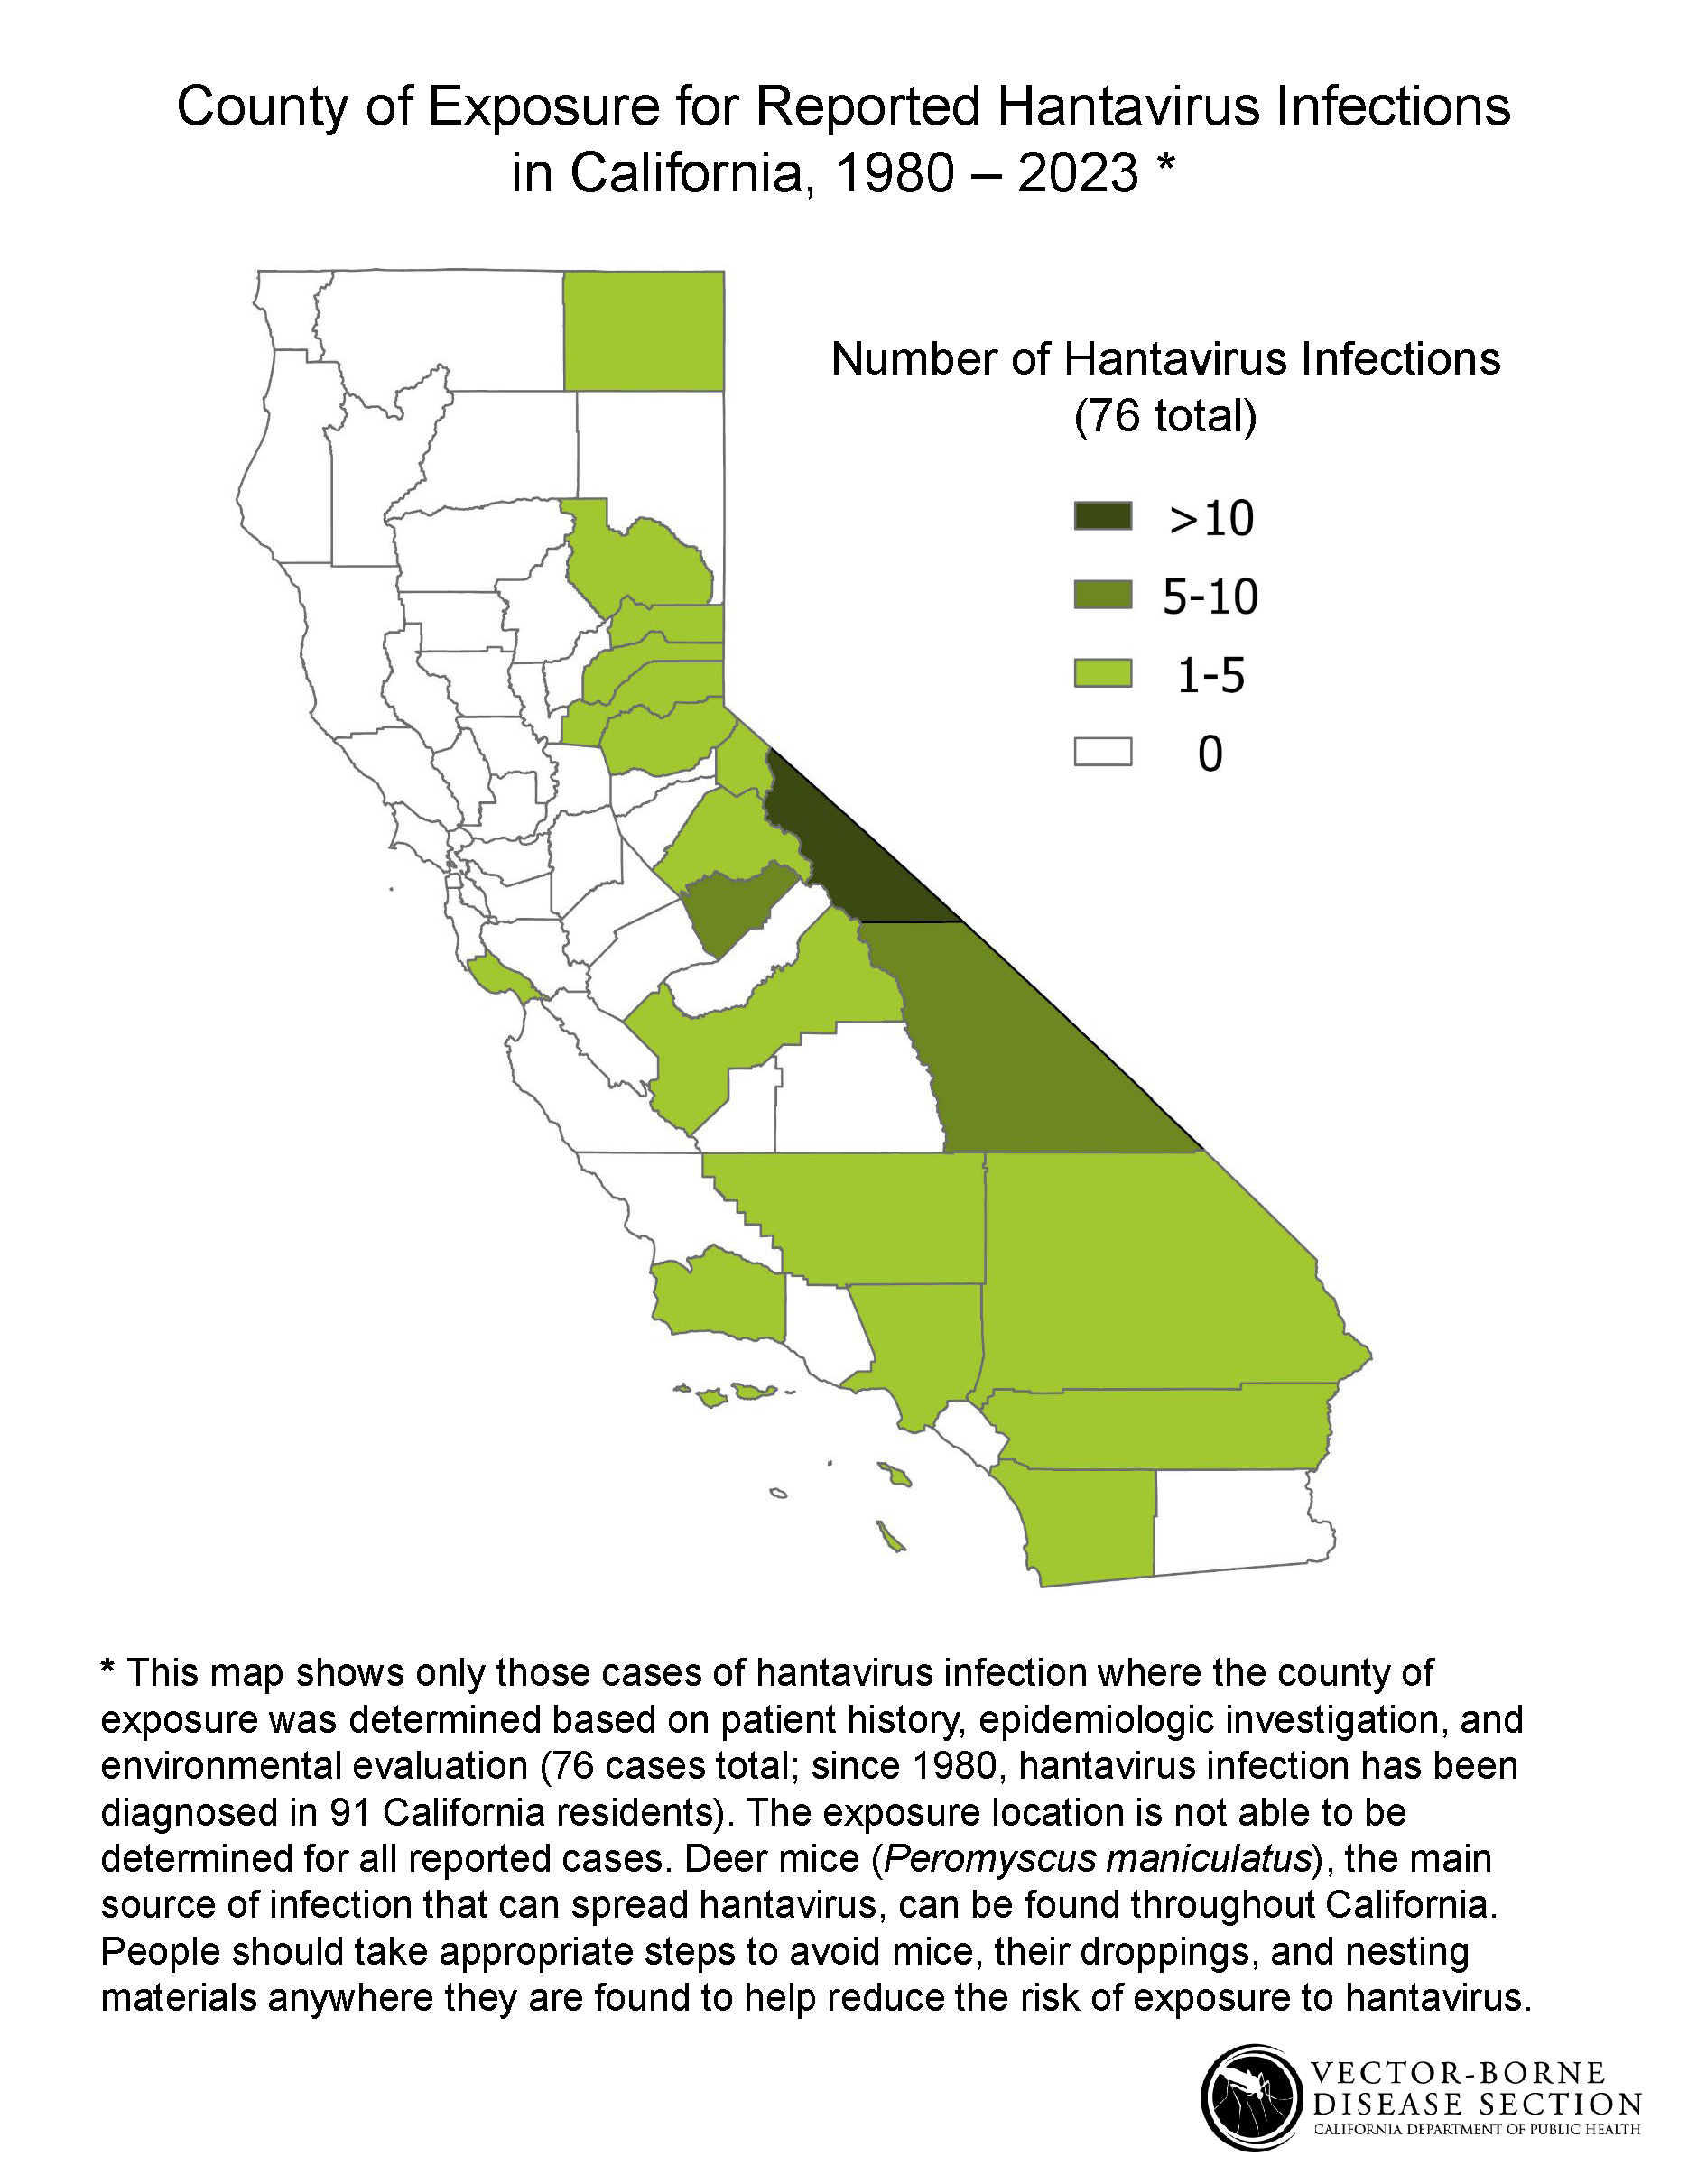 Map of county of exposure for reported hantavirus infections in California